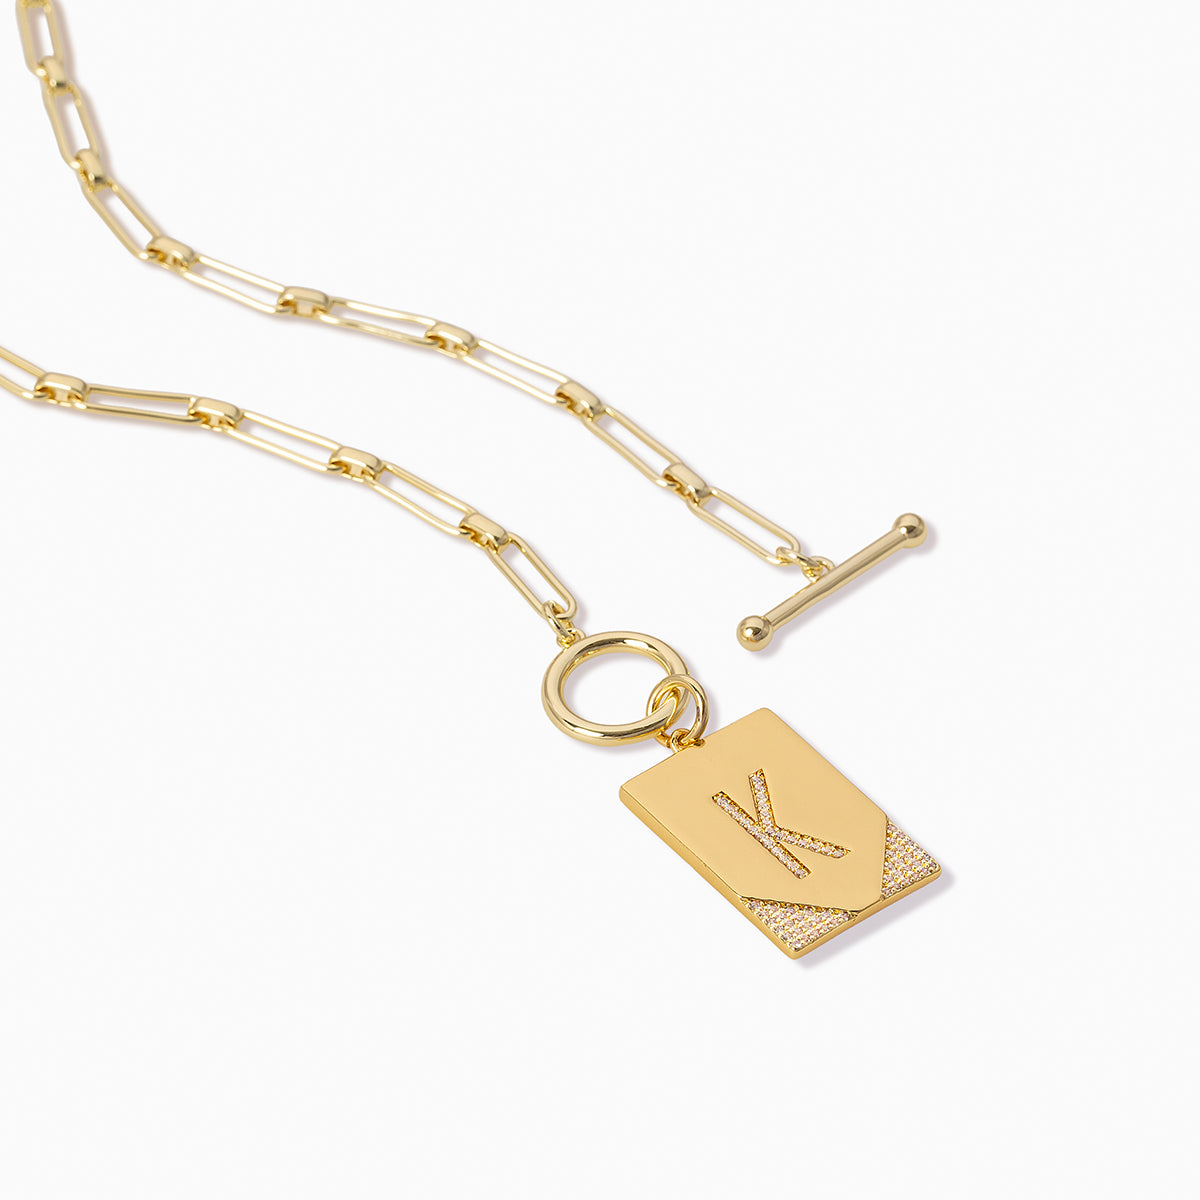 Leave Your Mark Chain Necklace | Gold A Gold B Gold C Gold D Gold E Gold G Gold H Gold J Gold K Gold L Gold M Gold N Gold P Gold R Gold S Gold T Gold V | Product Detail Image 2 | Uncommon James